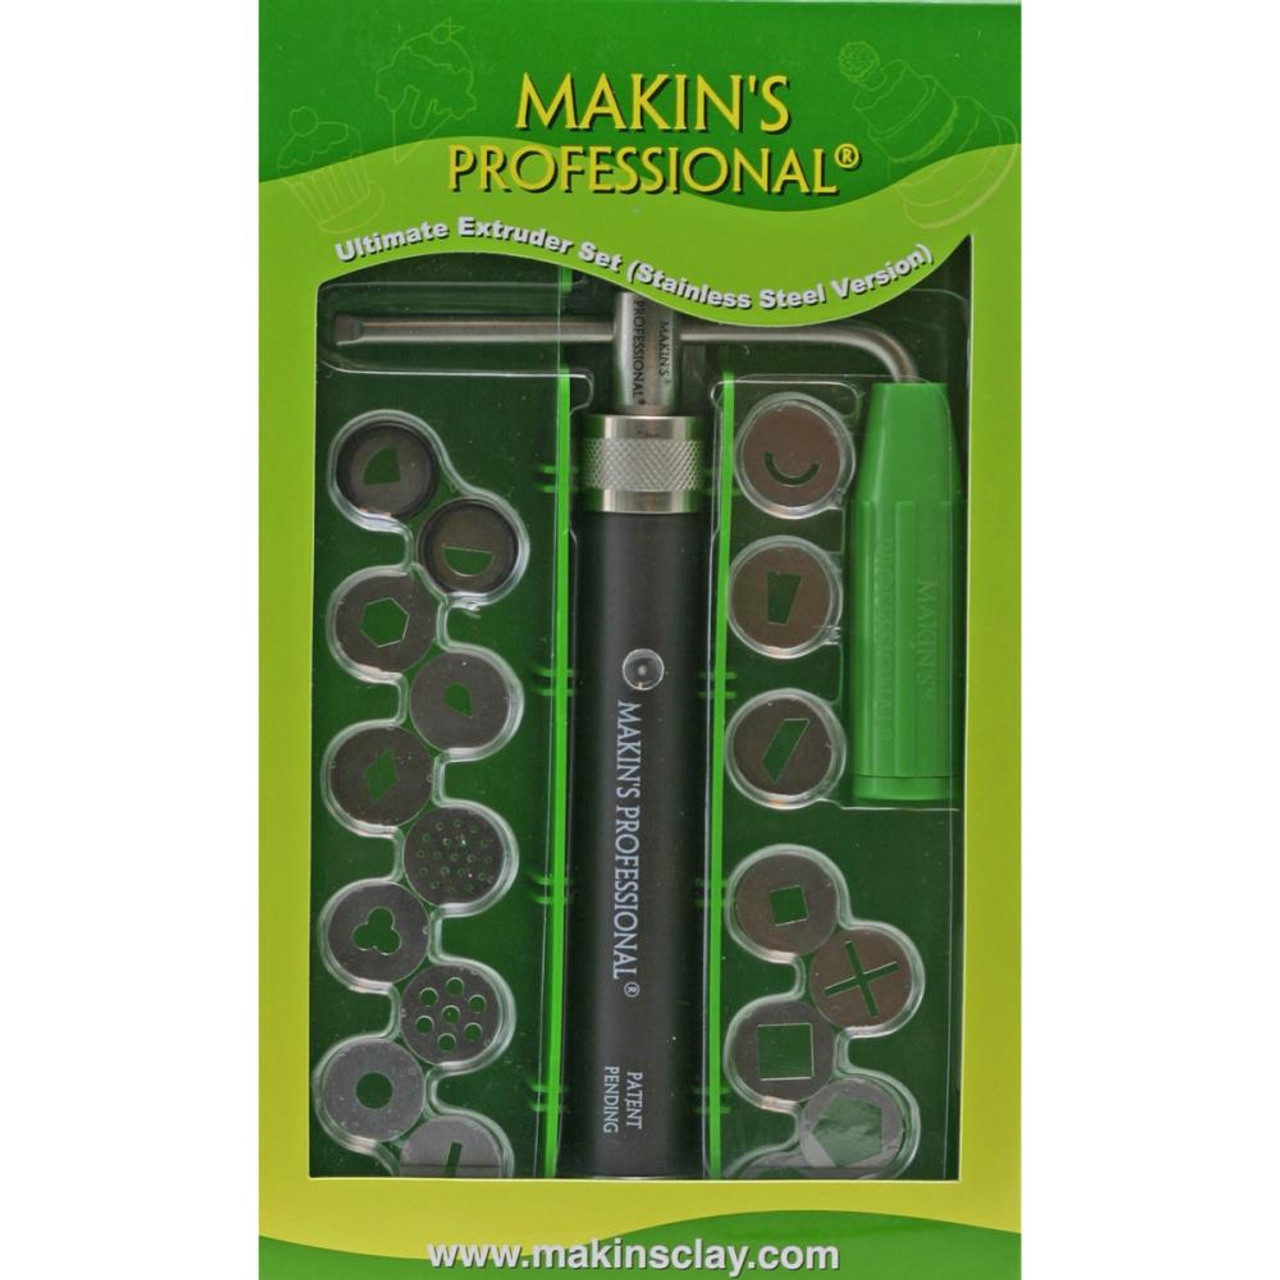 Makin's Professional Clay Texture Set (8 pc.)